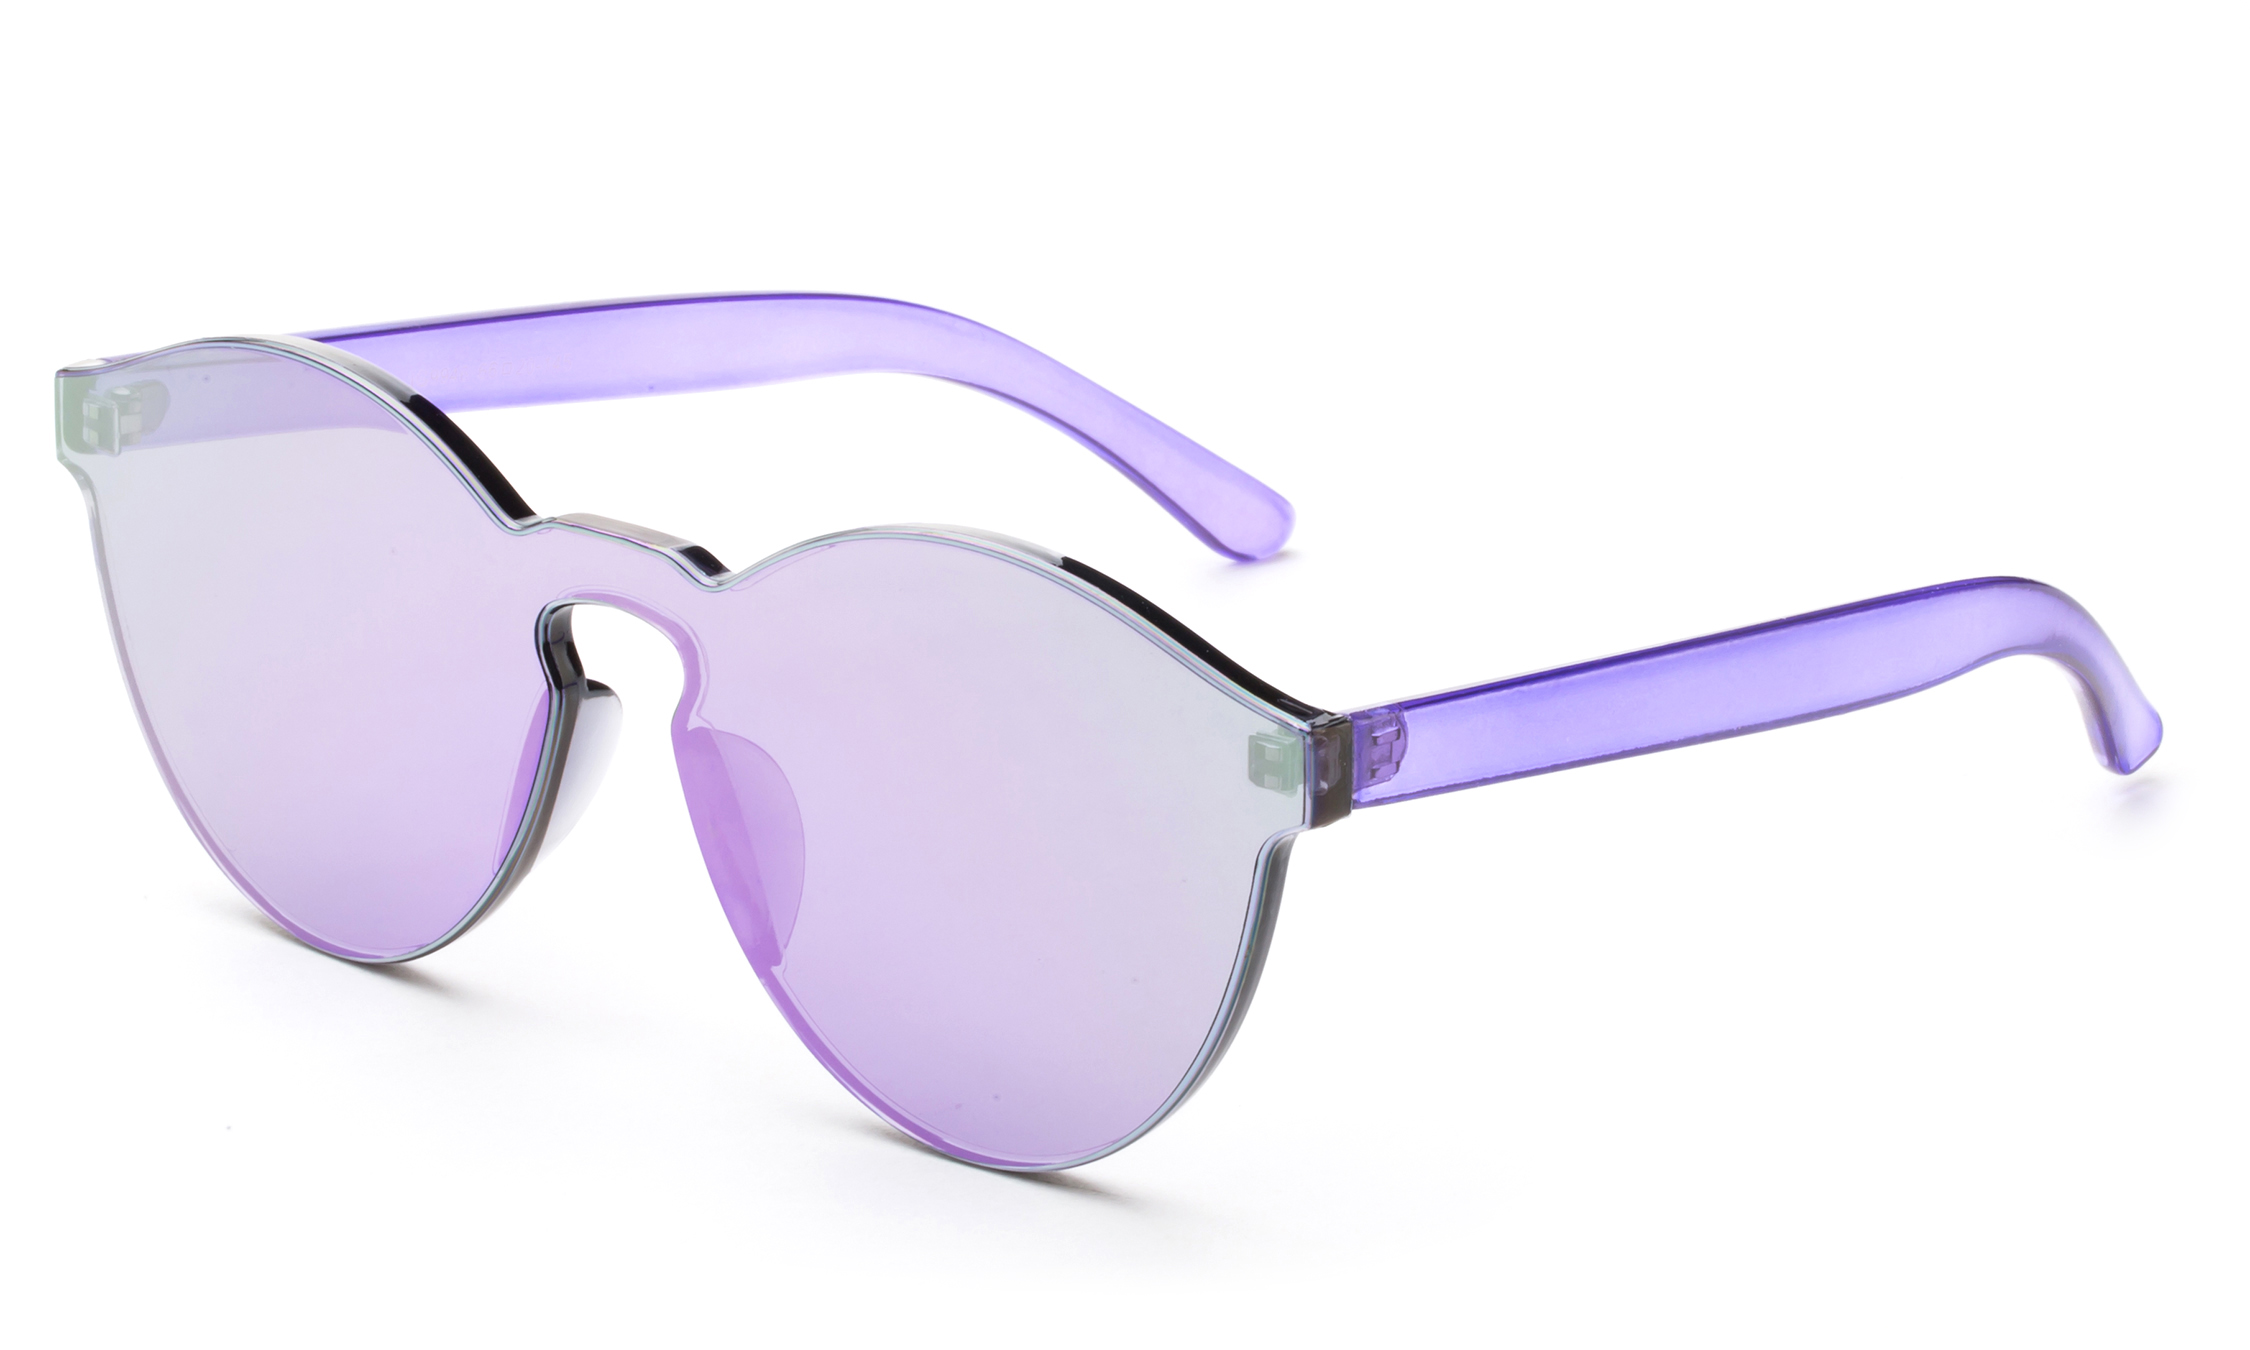 Newbee Fashion - One Piece Oversized Rimless Sunglasses Transparent Clear Candy Color Cateye Sunglasses - image 2 of 2